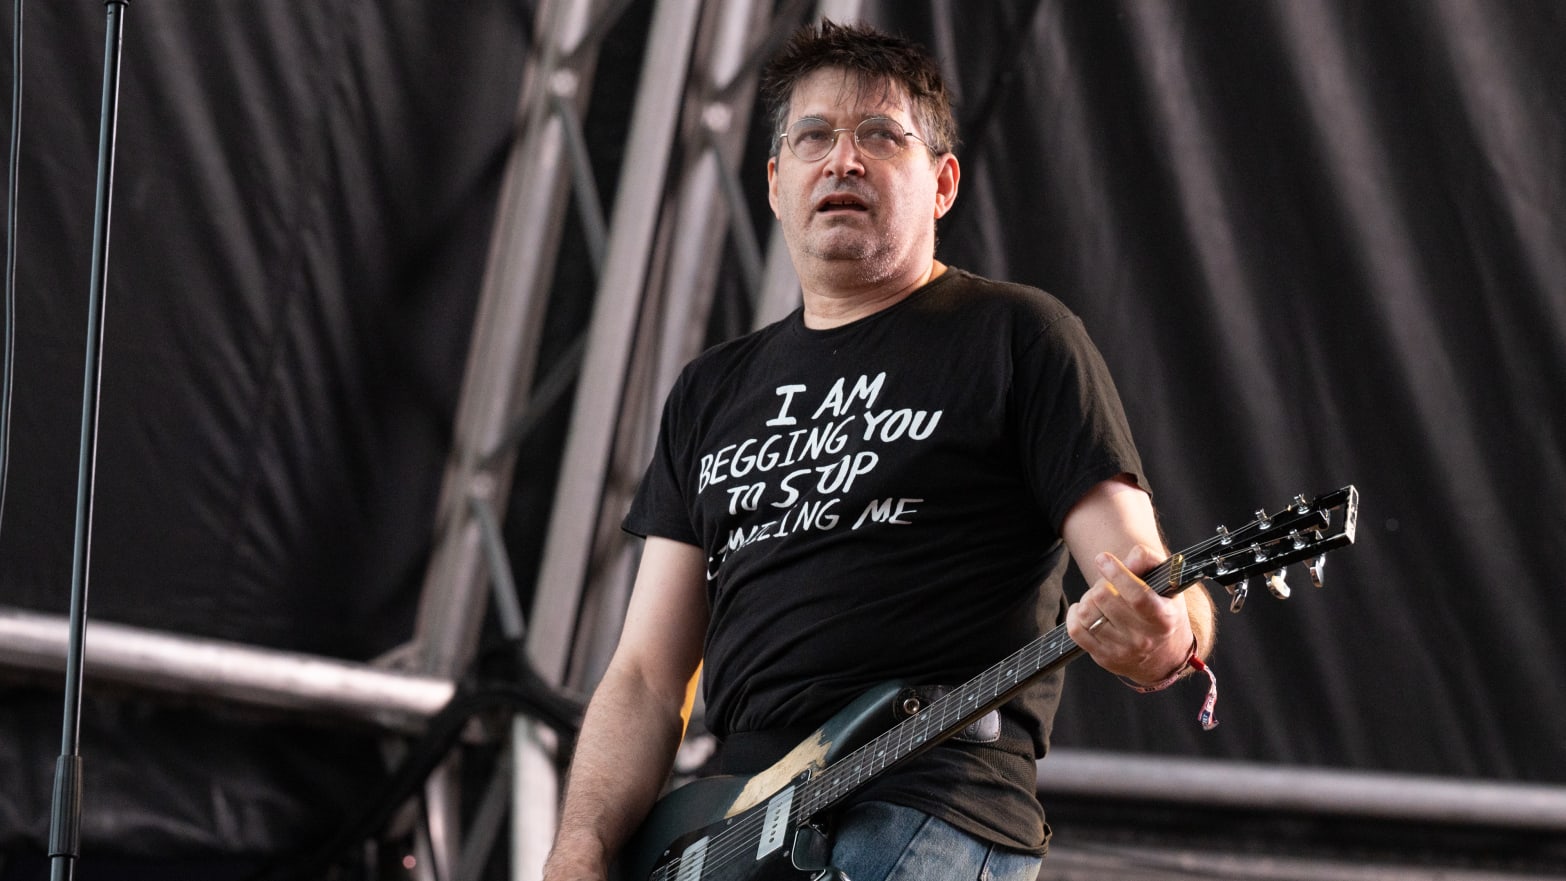 Guitarist and vocalist Steve Albini of Shellac performs on stage during Primavera Sound 2022 on June 3, 2022, in Barcelona, Spain.